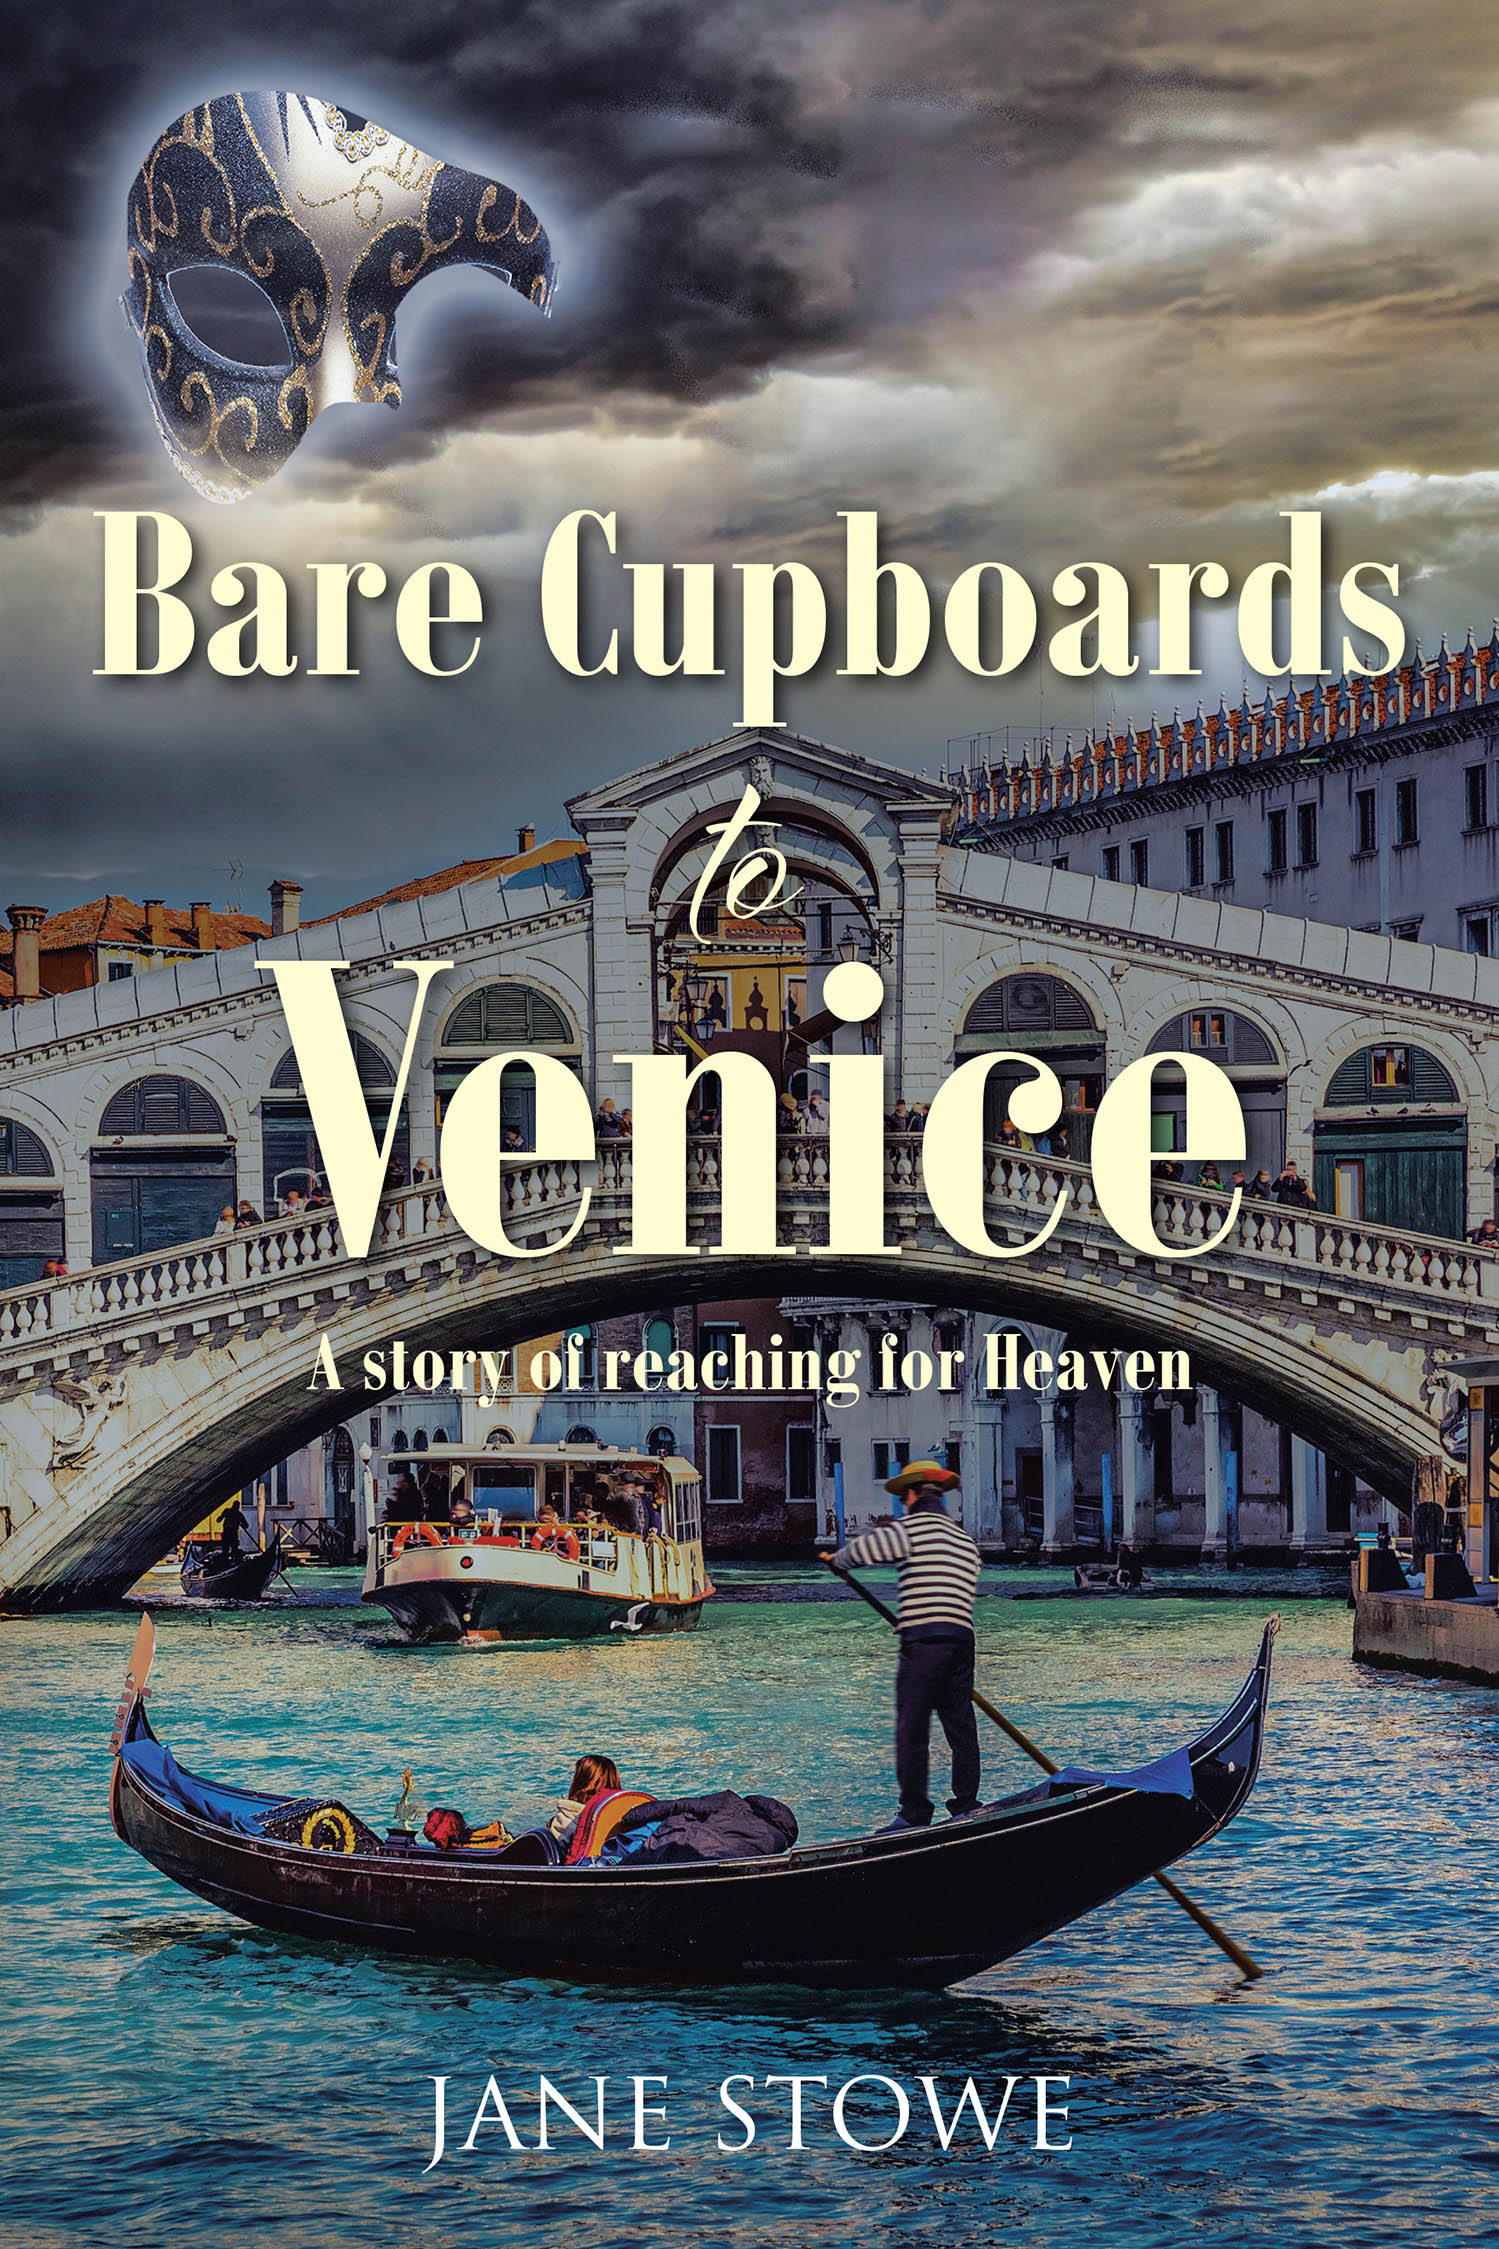 Jane Stowe’s Newly Released “BARE CUPBOARDS TO VENICE: A story of reaching for Heaven” is a Captivating Journey of Resilience and Redemption